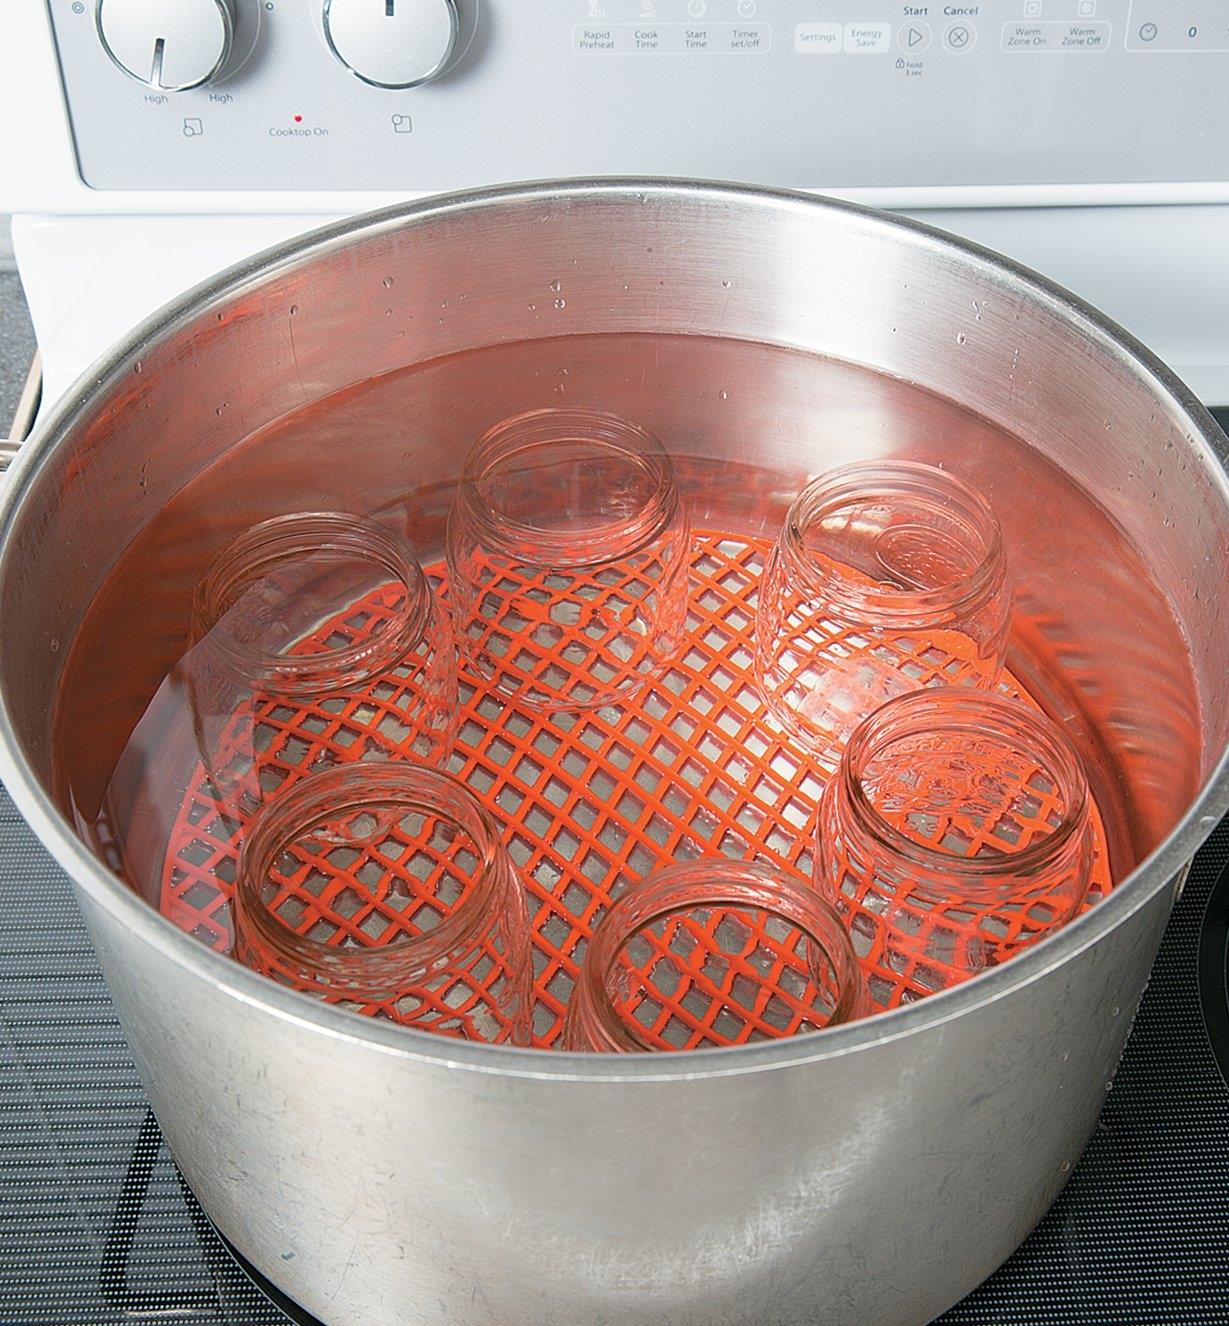 Silicone Canning Rack under canning jars at the bottom of a pot of water